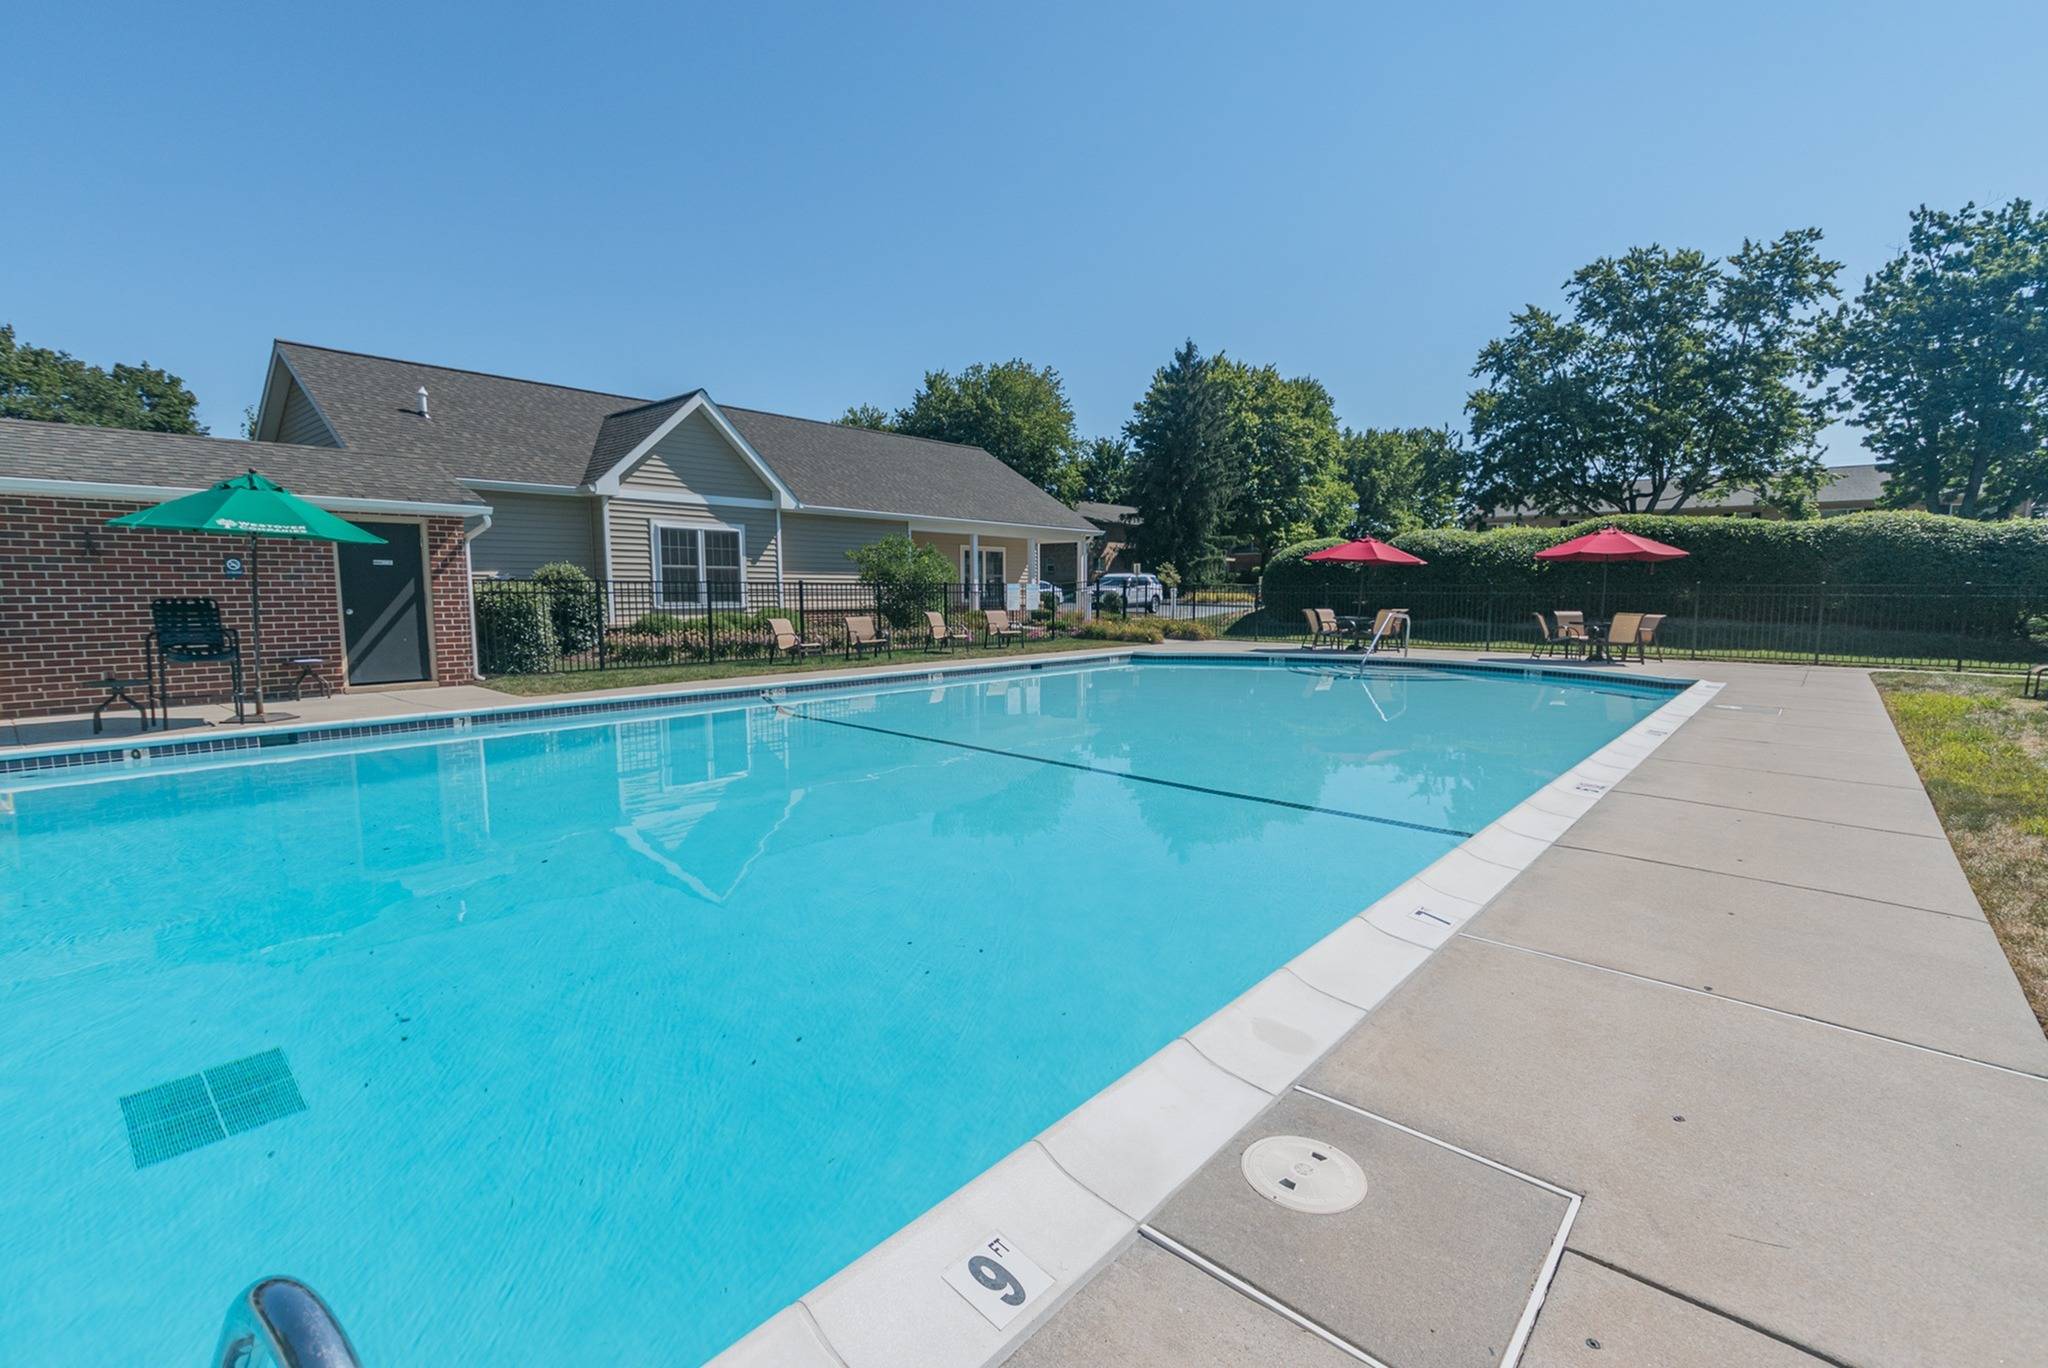 Woodland Plaza Apartments large swimming pool with tables and chairs